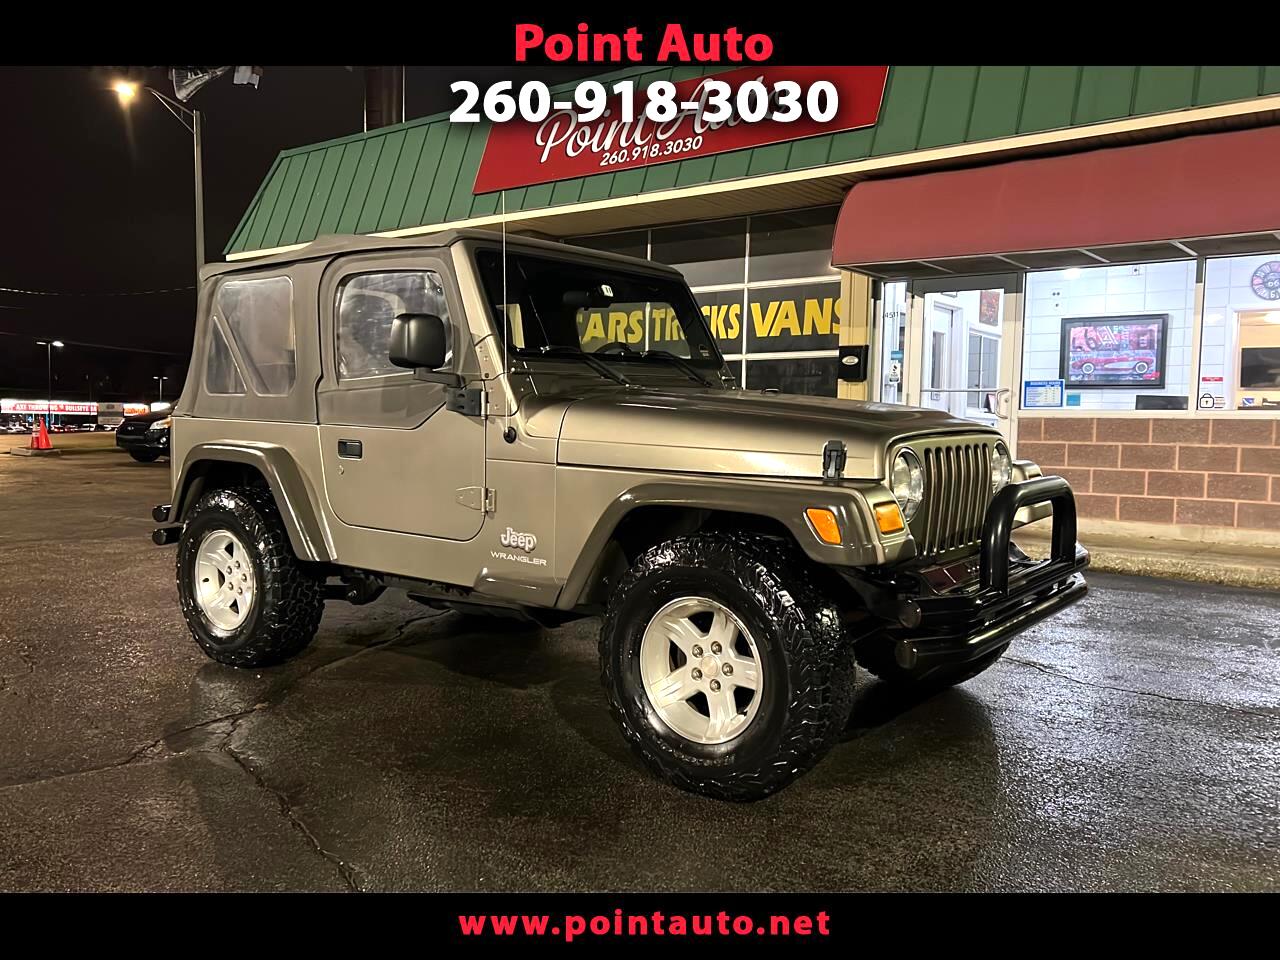 Used 2005 Jeep Wrangler 2dr SE for Sale in Fort Wayne IN 46825 Point Auto